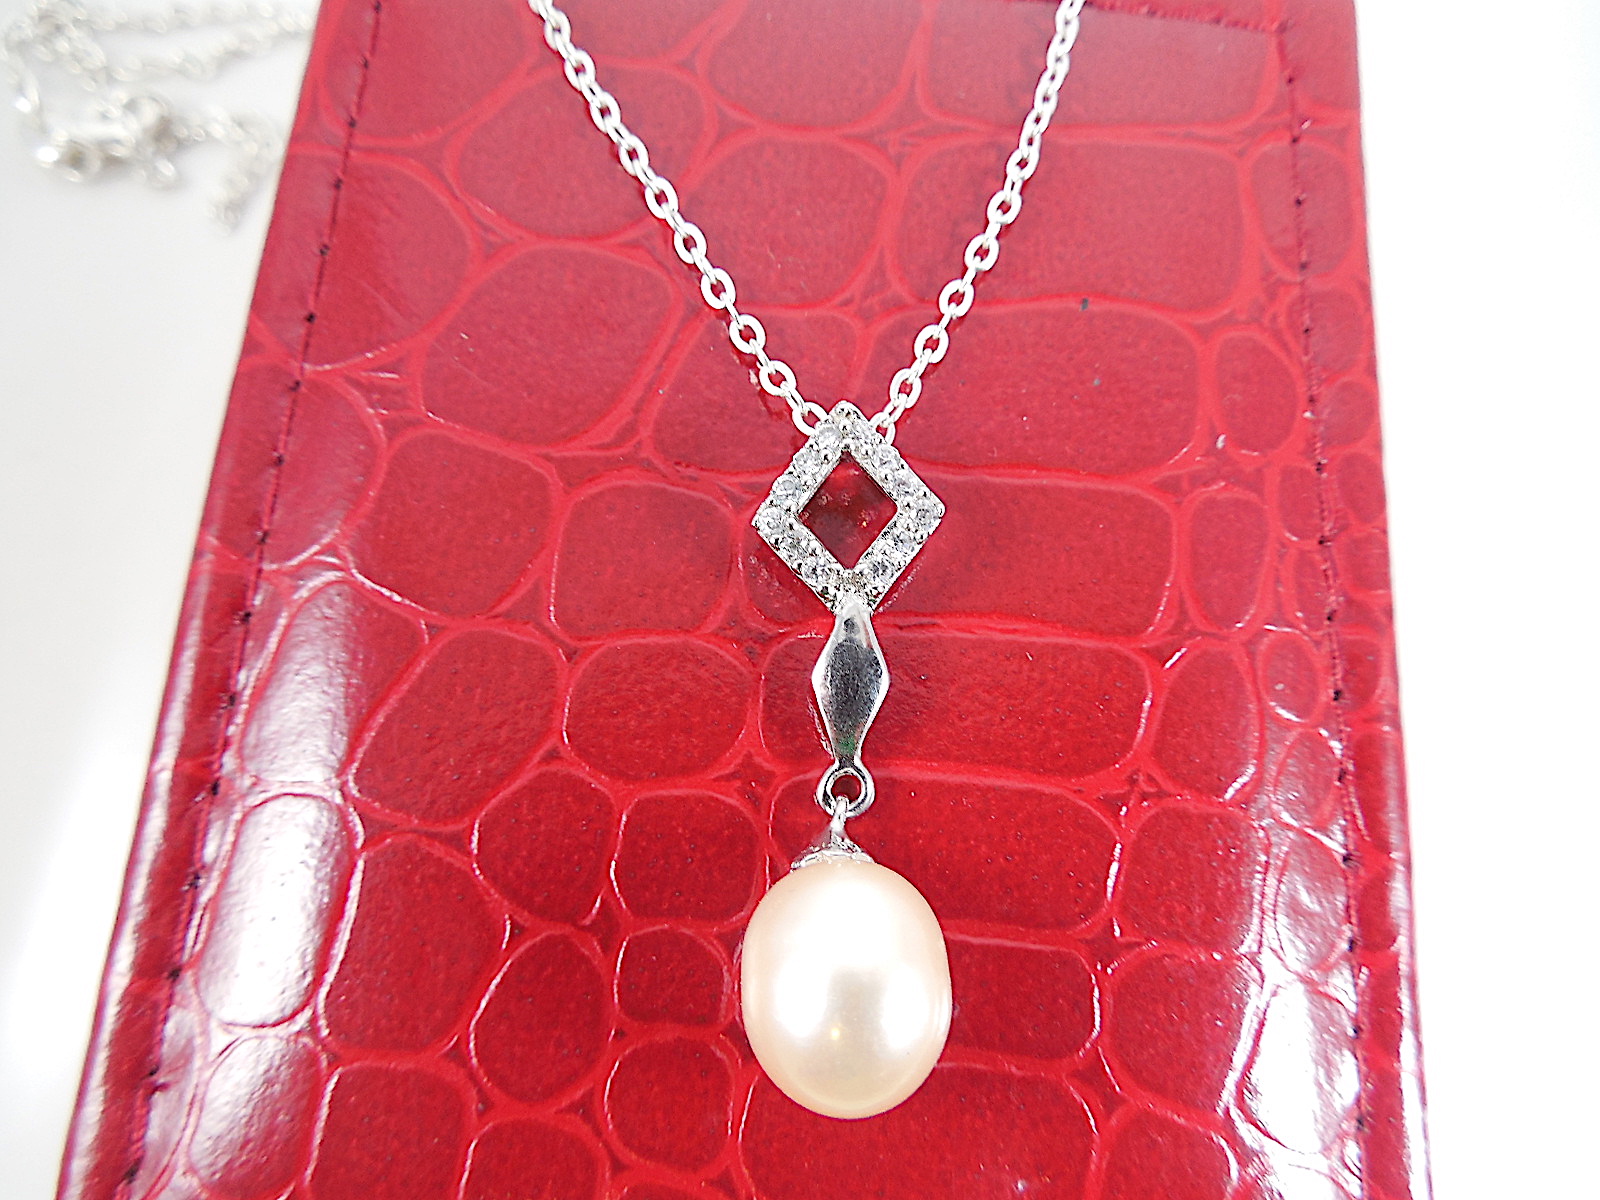 Silver necklace with Pearl pendant - Image 5 of 5